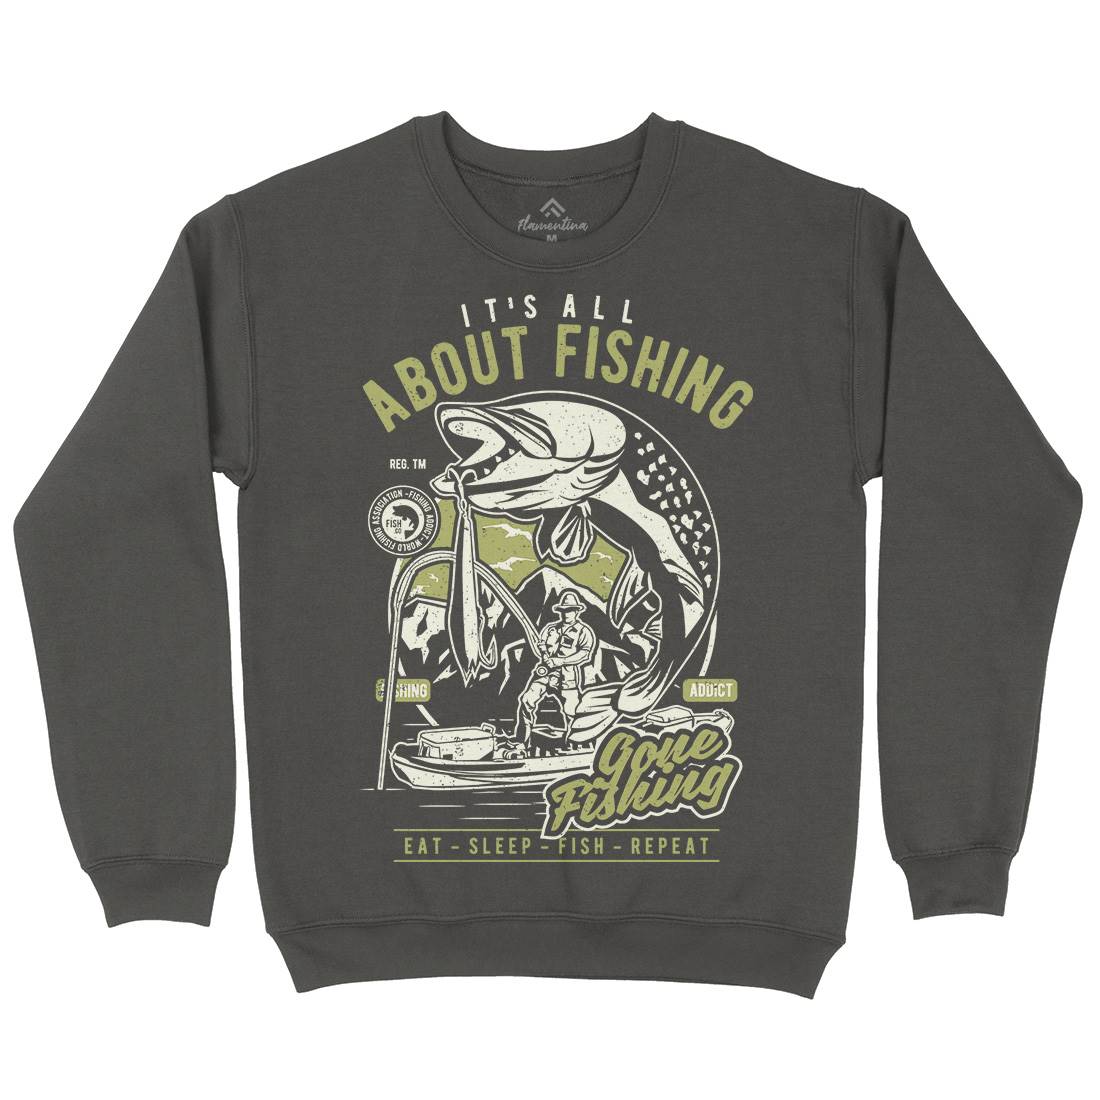 All About Mens Crew Neck Sweatshirt Fishing A604